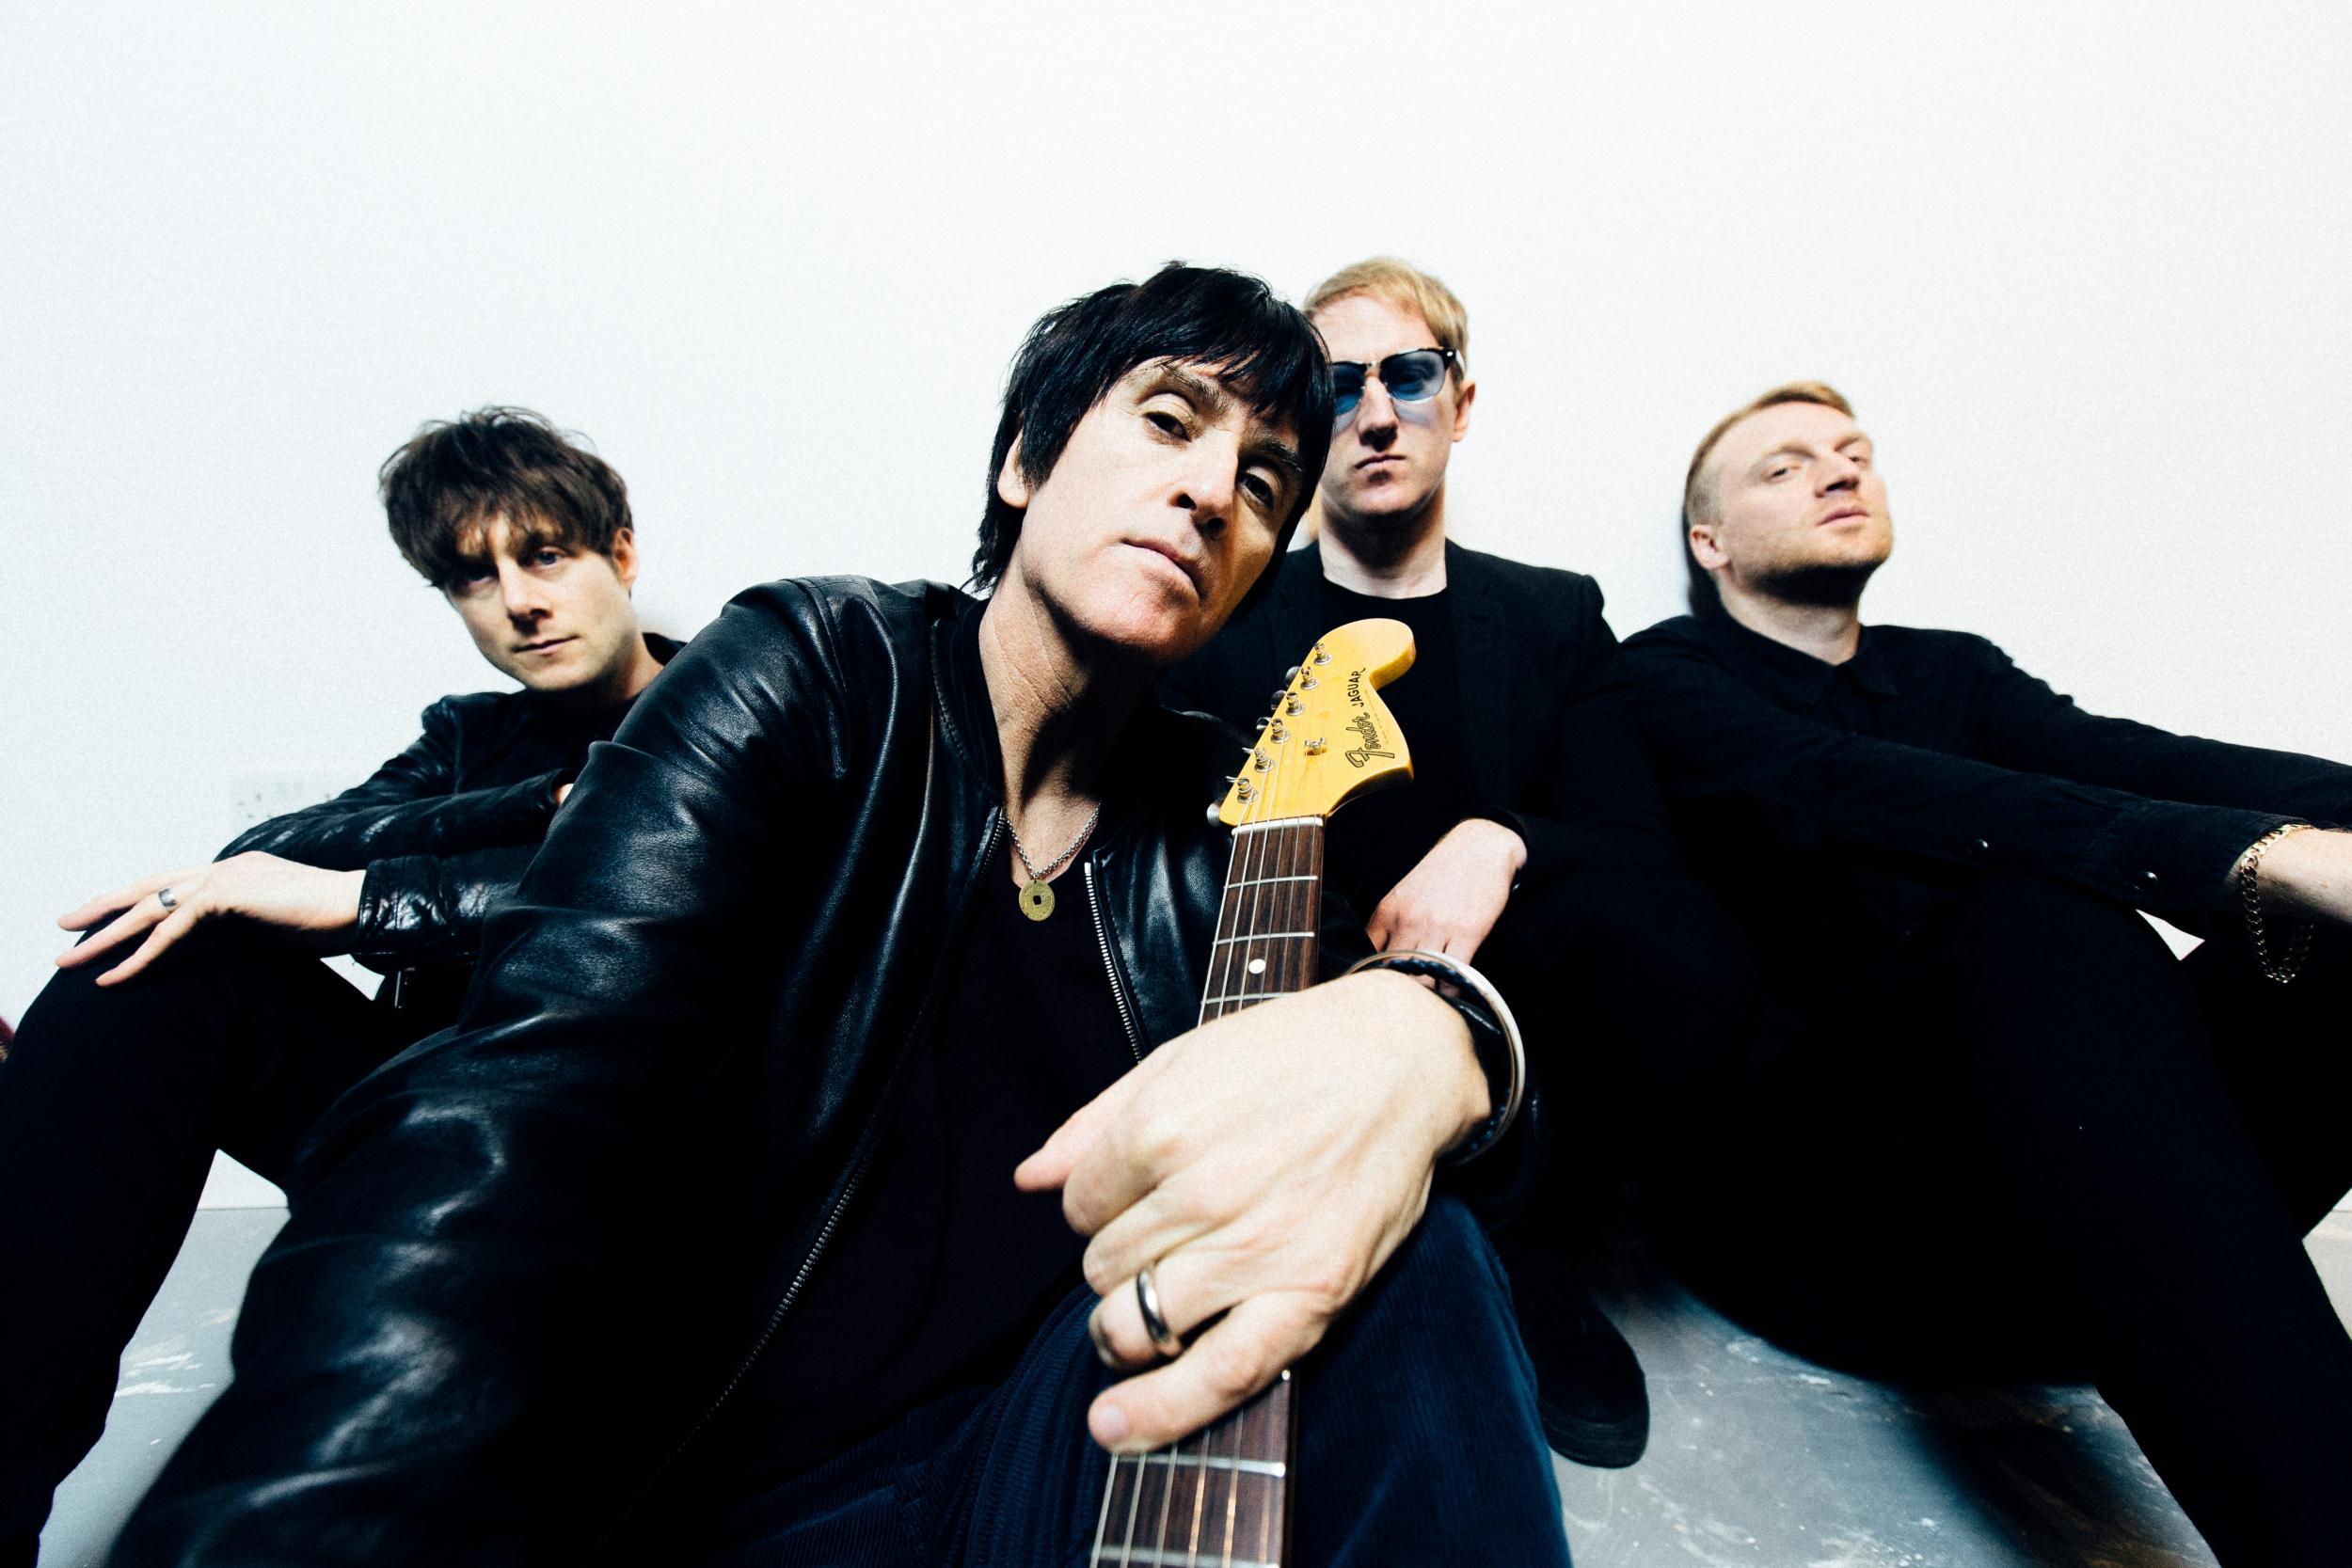 Johnny Marr with his band